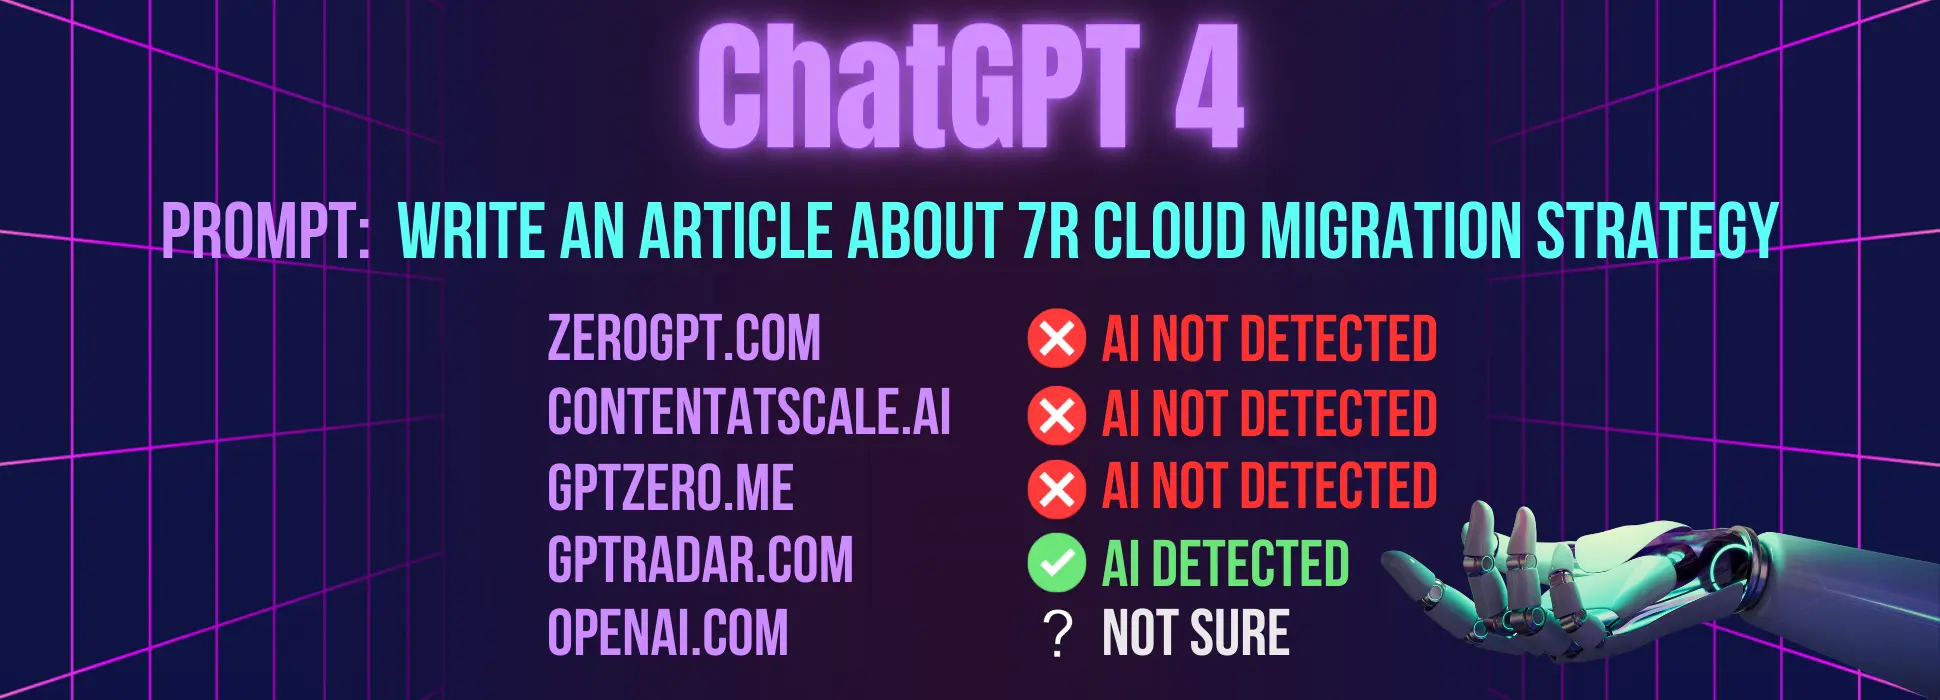 ChatGPT 4.0 results for prompt #1